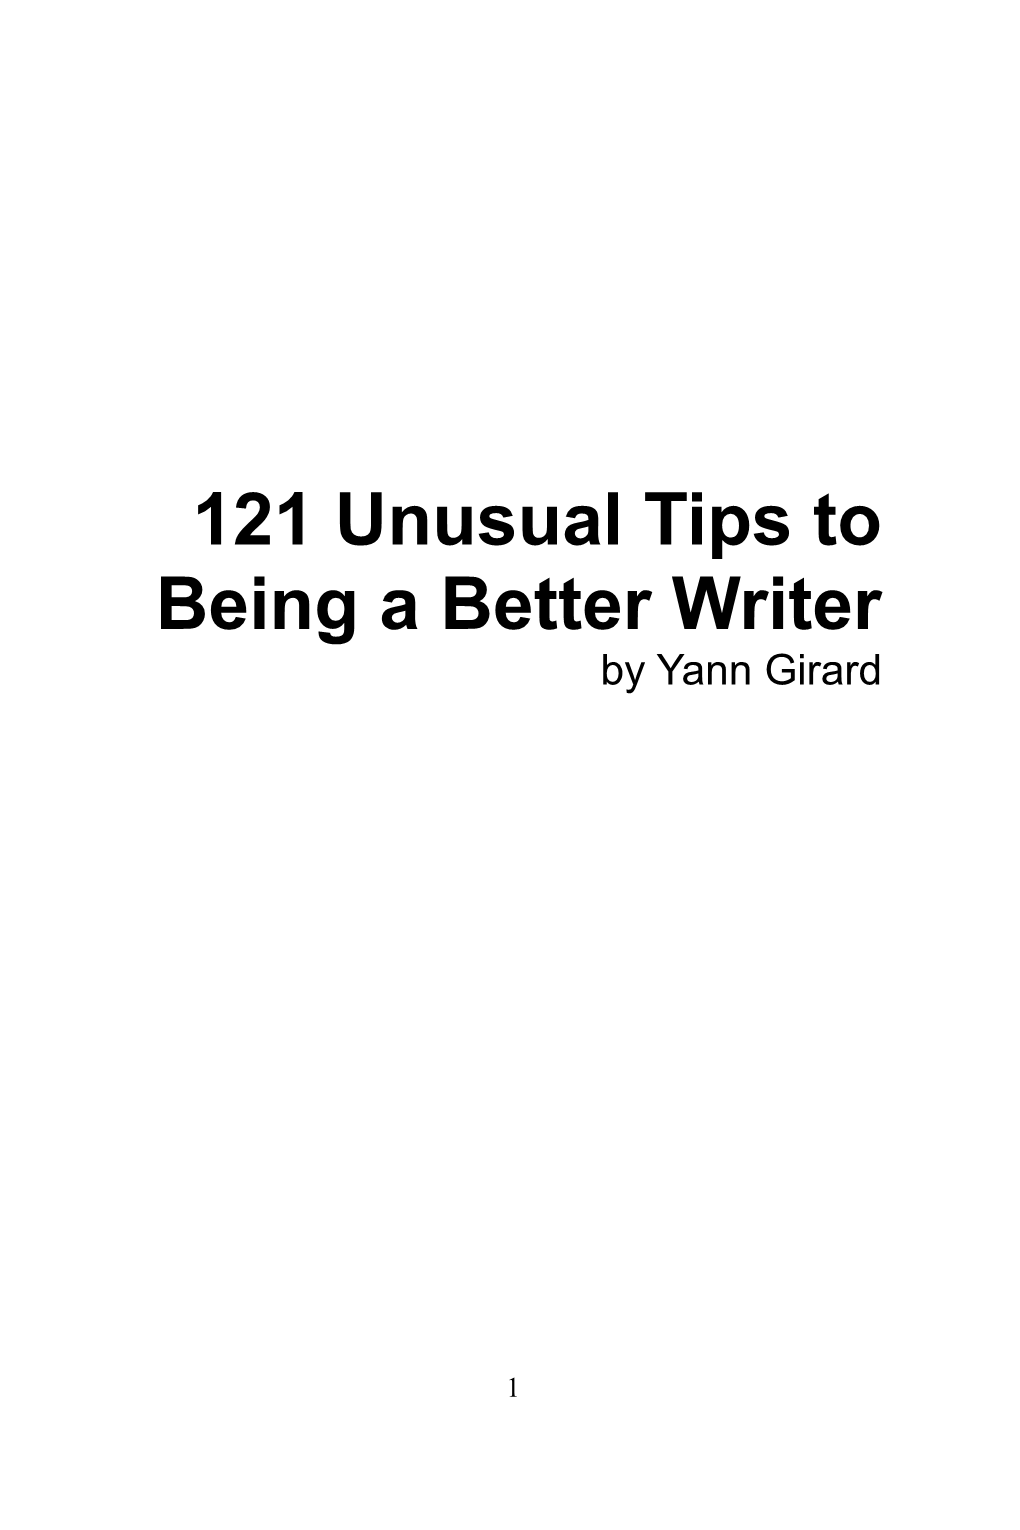 121 Unusual Tips to Being a Better Writer by Yann Girard